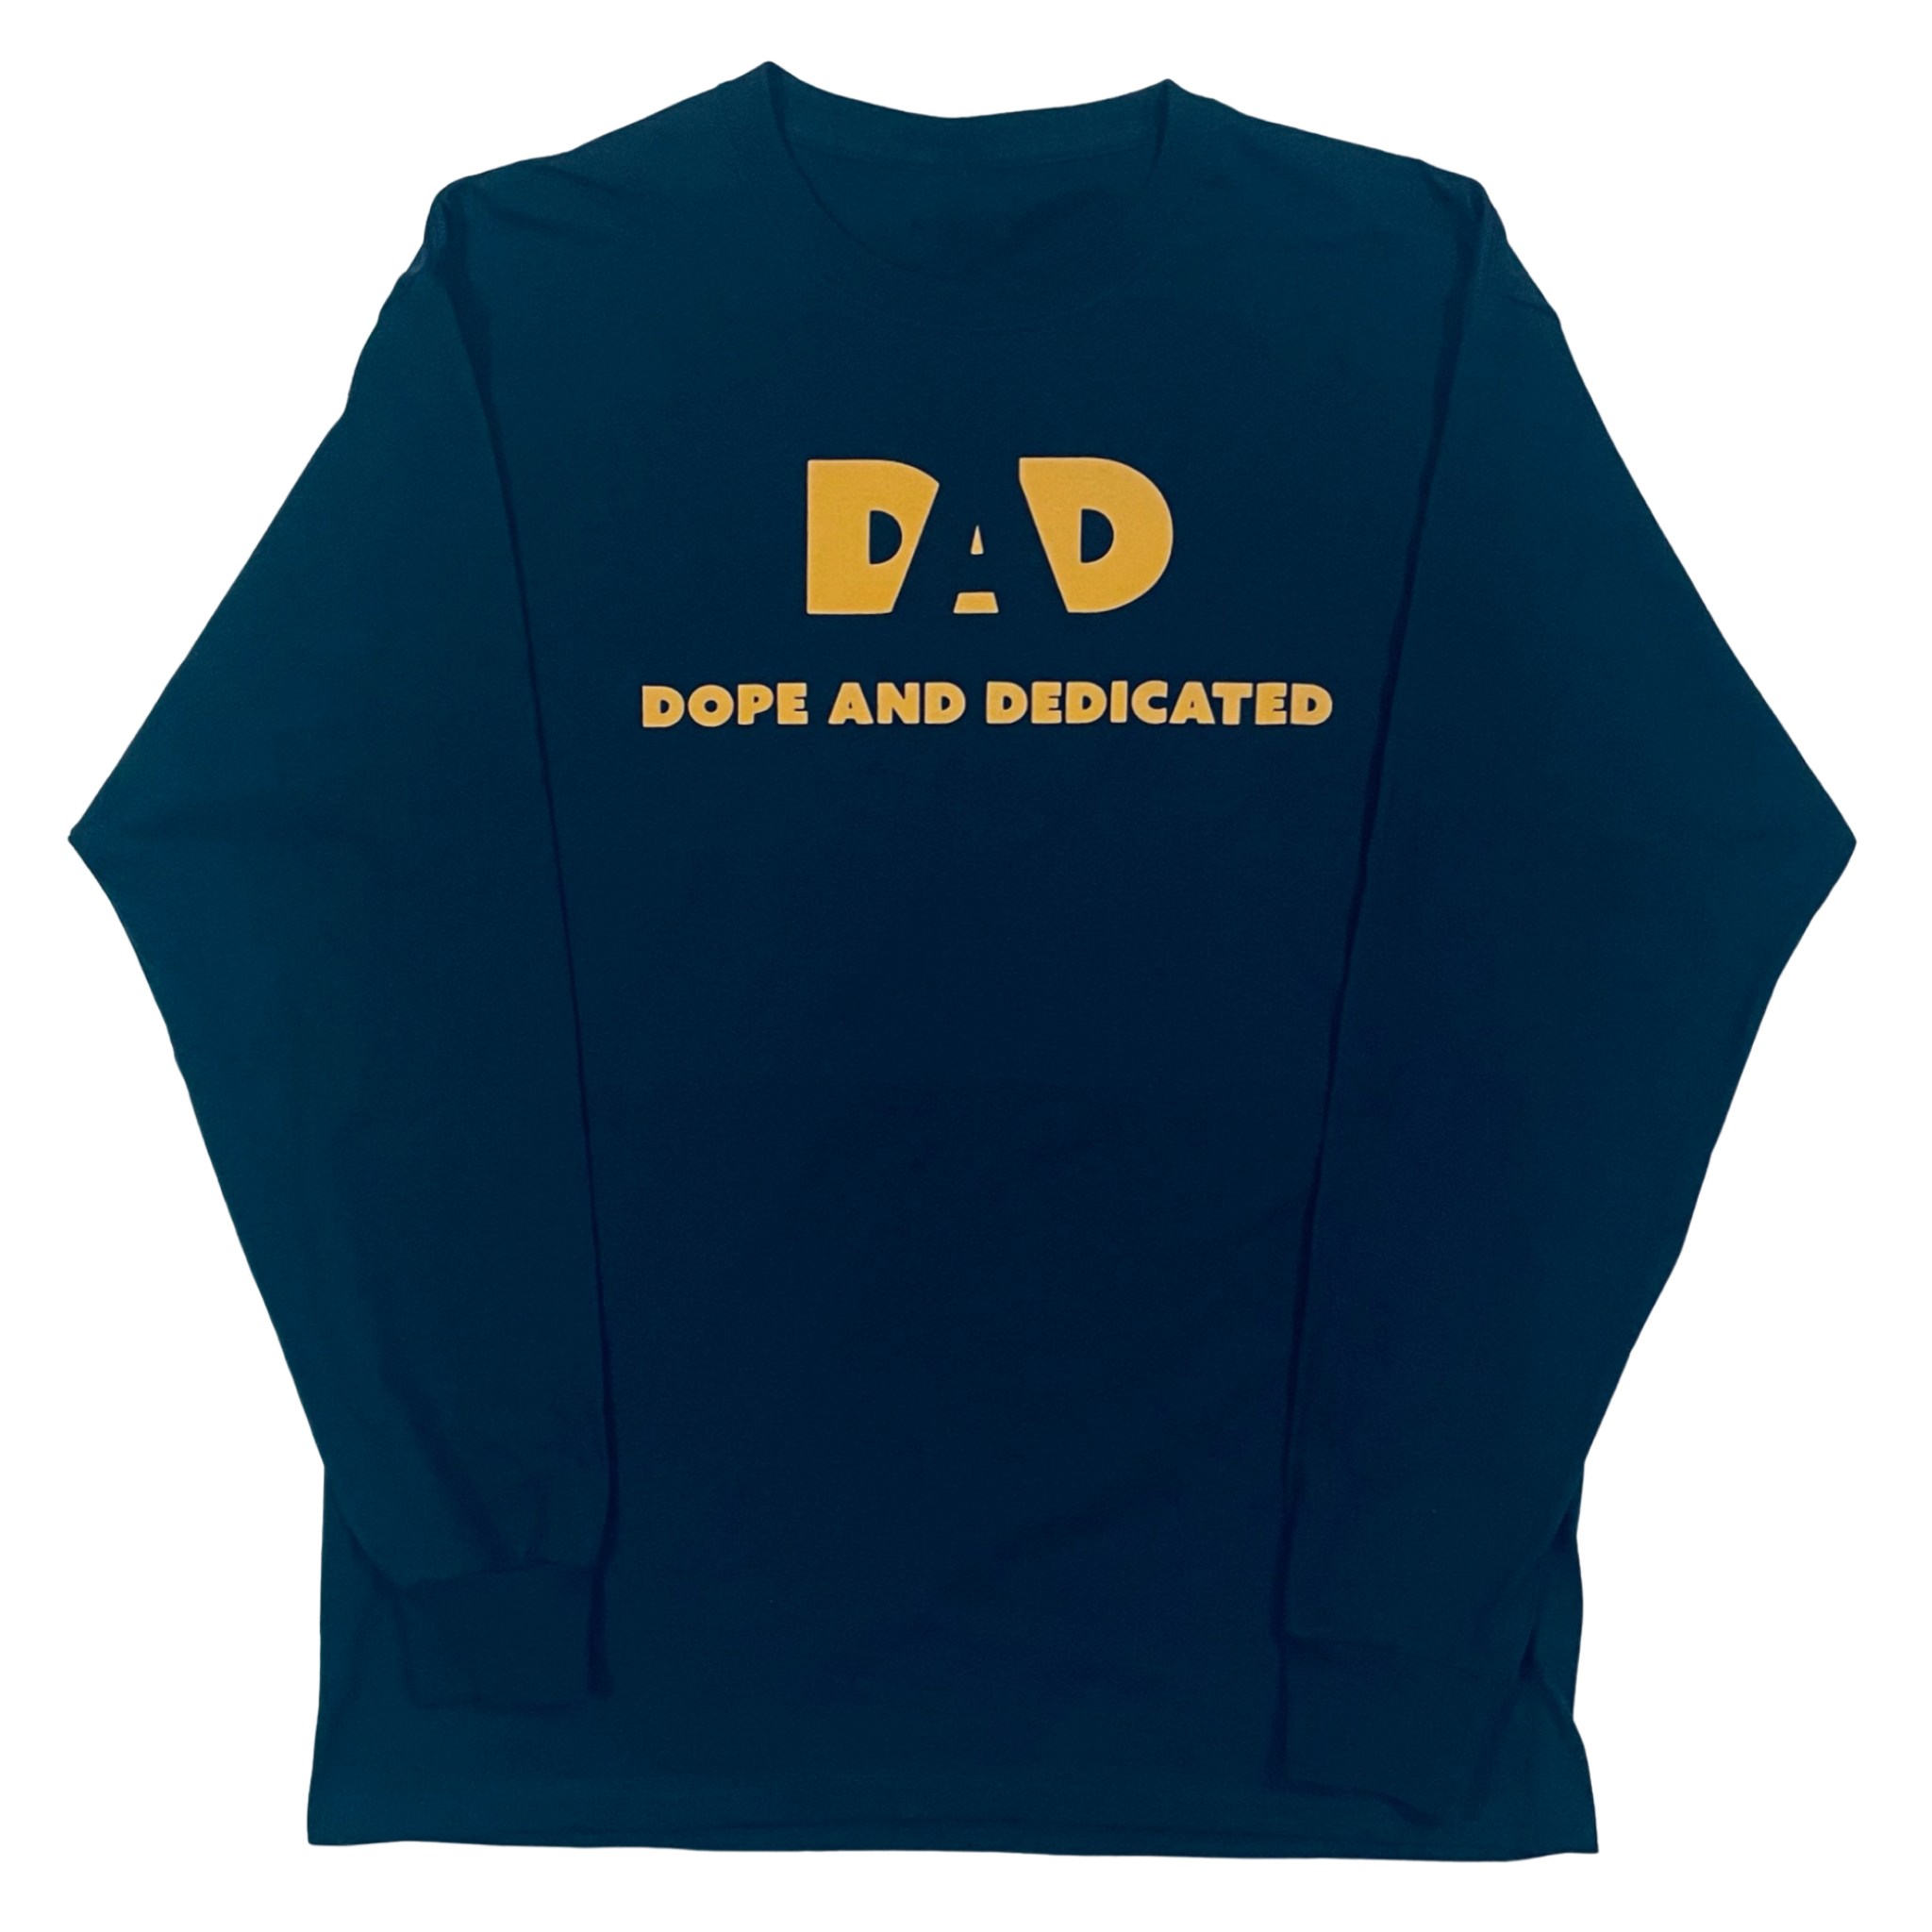 Dope Dads Do Dope Things Long Sleeve Shirt - Blk/Gold - Dope And Dedicated